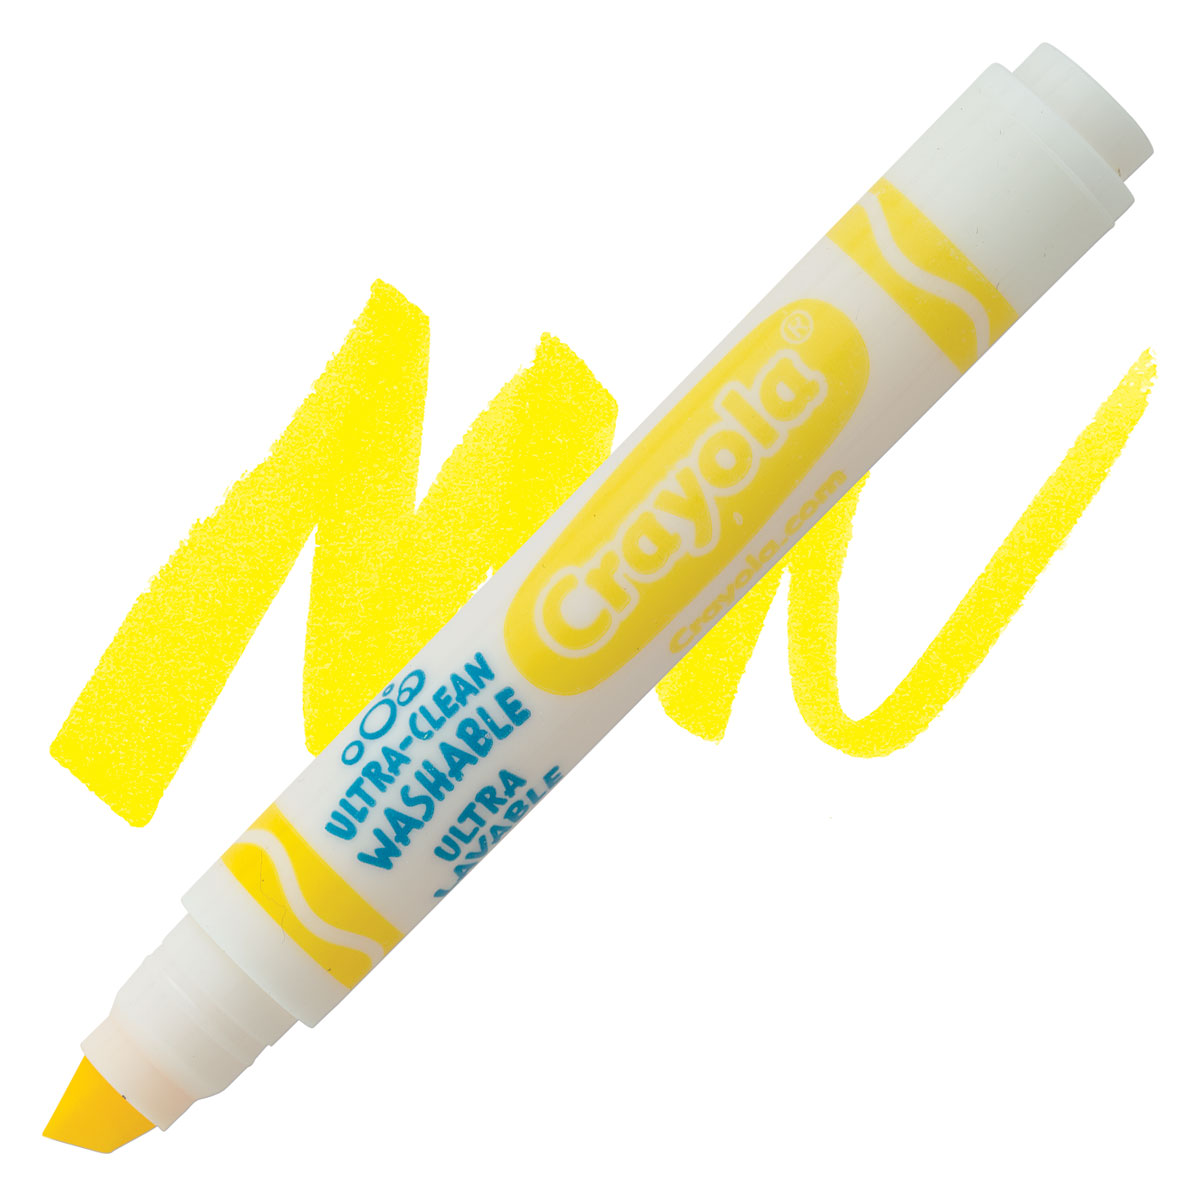 Crayola Ultra Clean Washable Marker Yellow Broad Tip Blick Art Materials